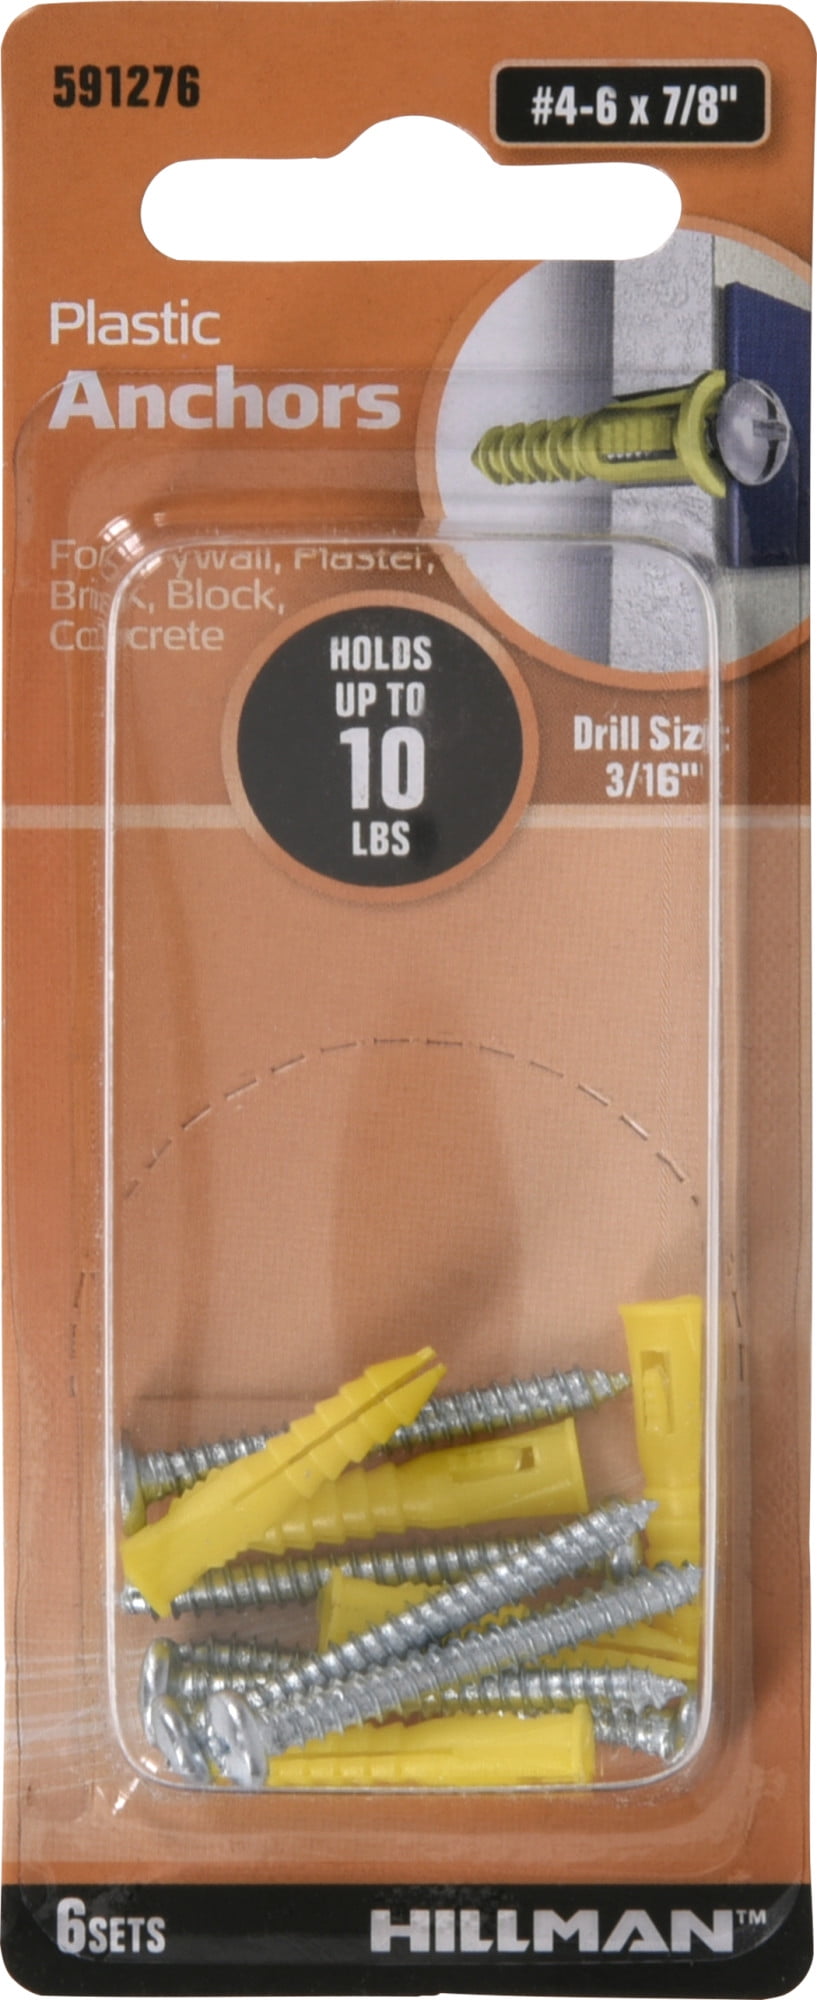 Hillman Ribbed Plastic Anchors With Screws 4 6 X 78 6 Sets 